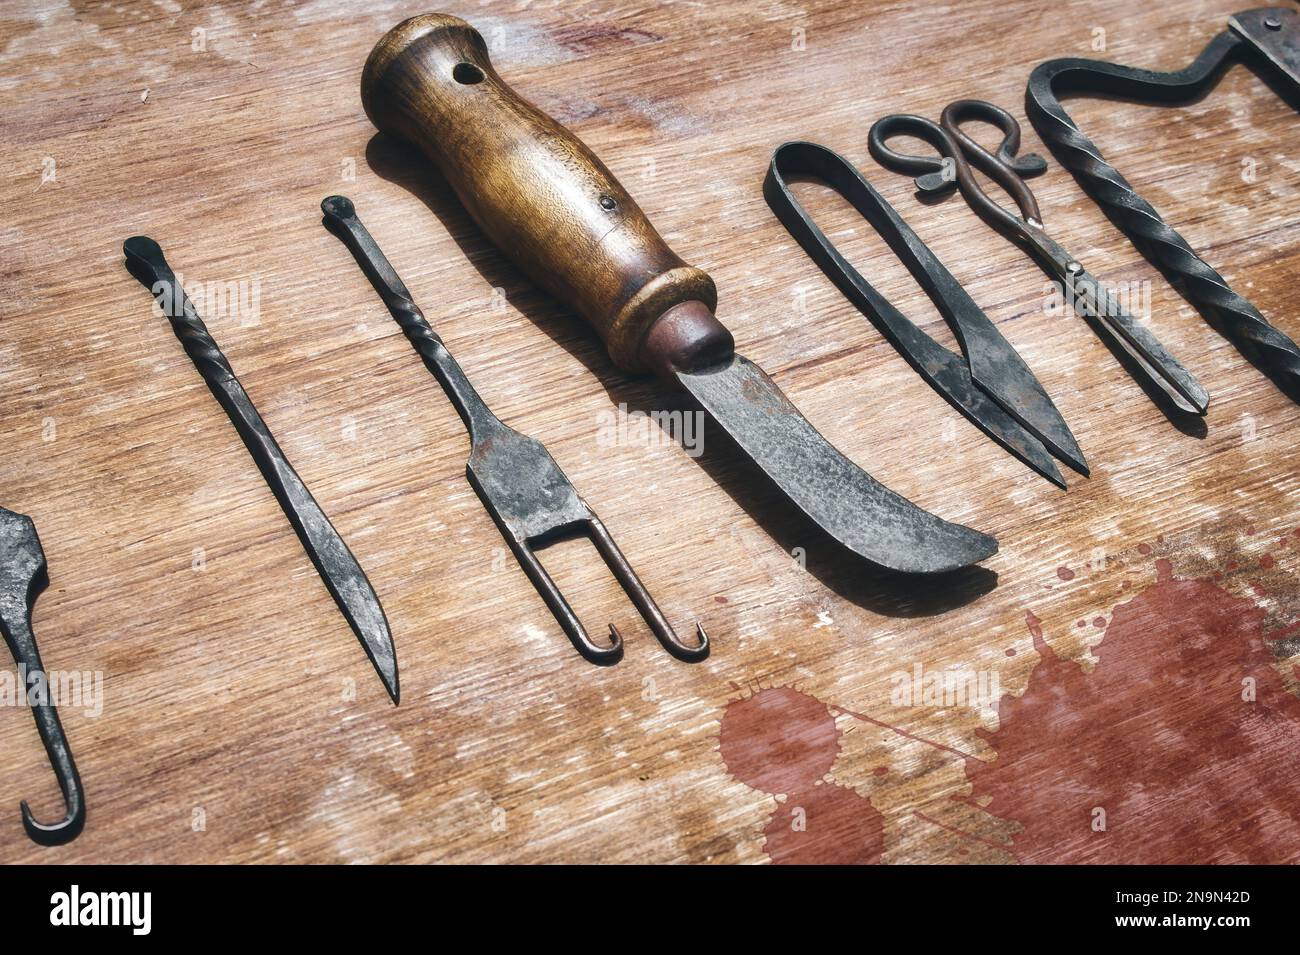 A selection of medieval surgical instruments on a blood-splattered wooden table Stock Photo